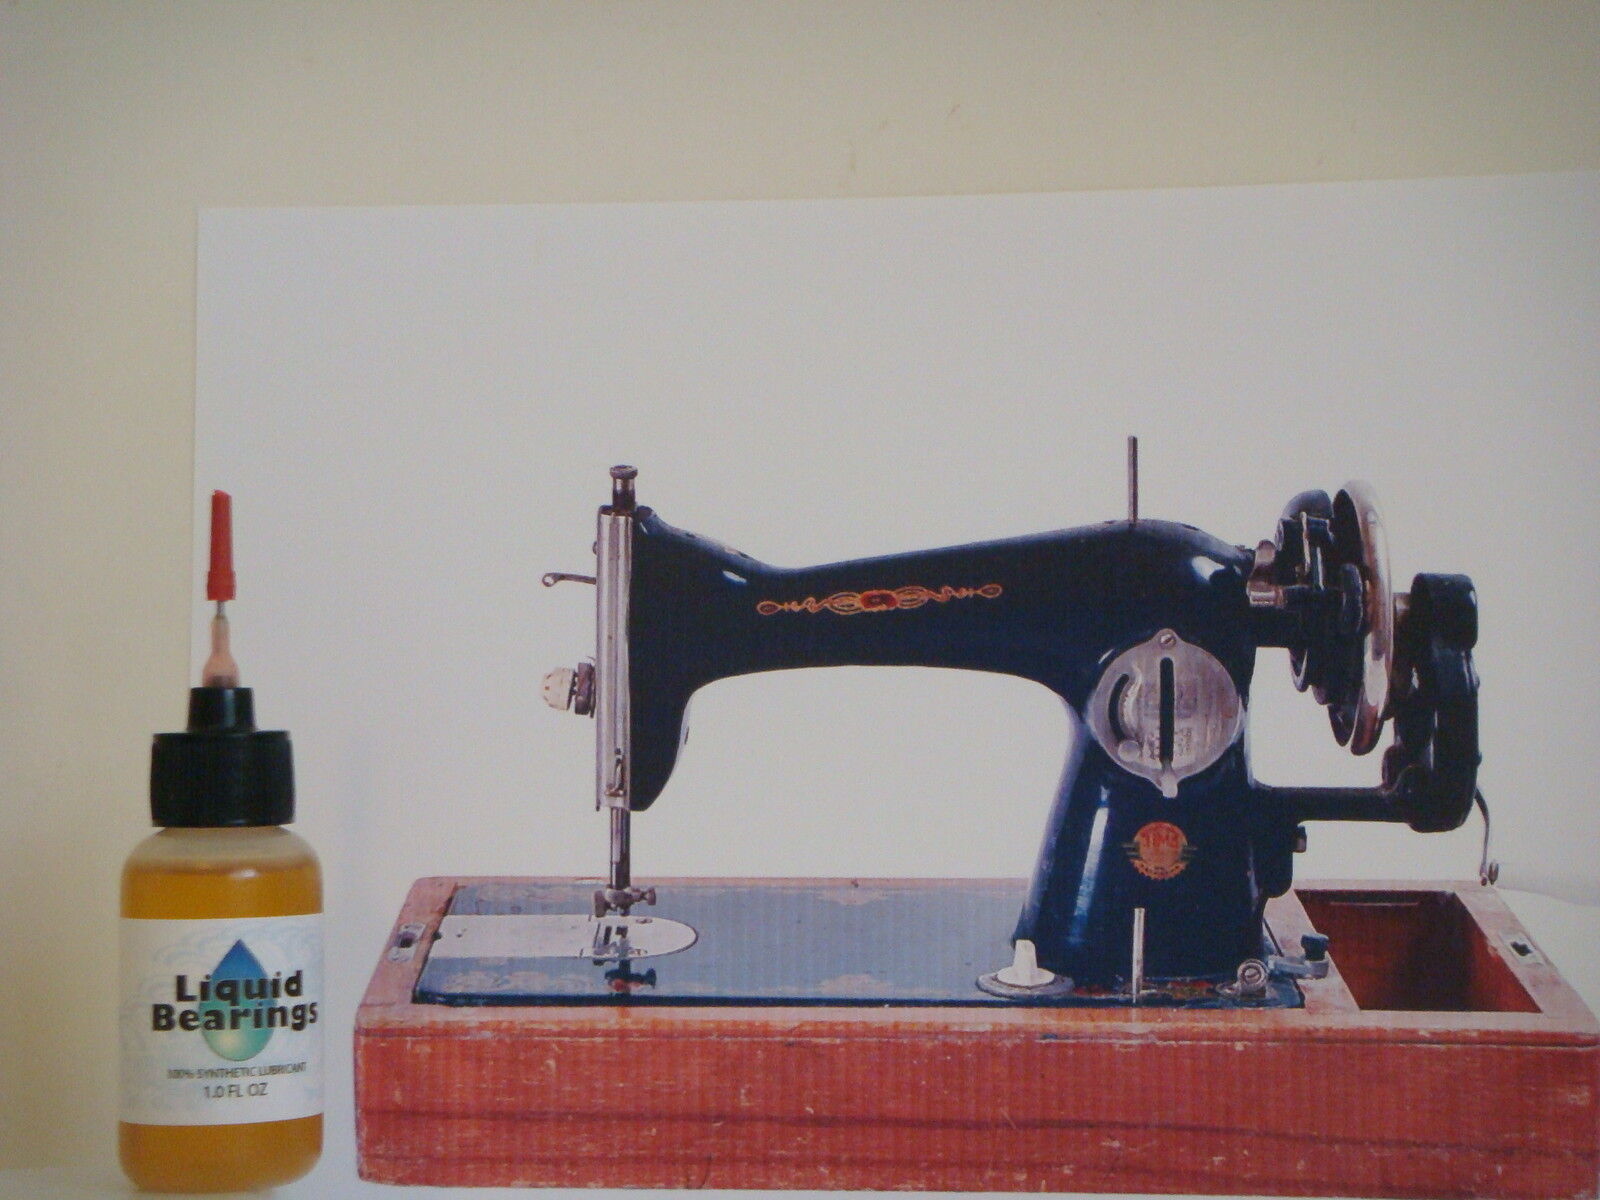  Liquid Bearings, BEST 100%-synthetic oil for antique Singer sewing machines